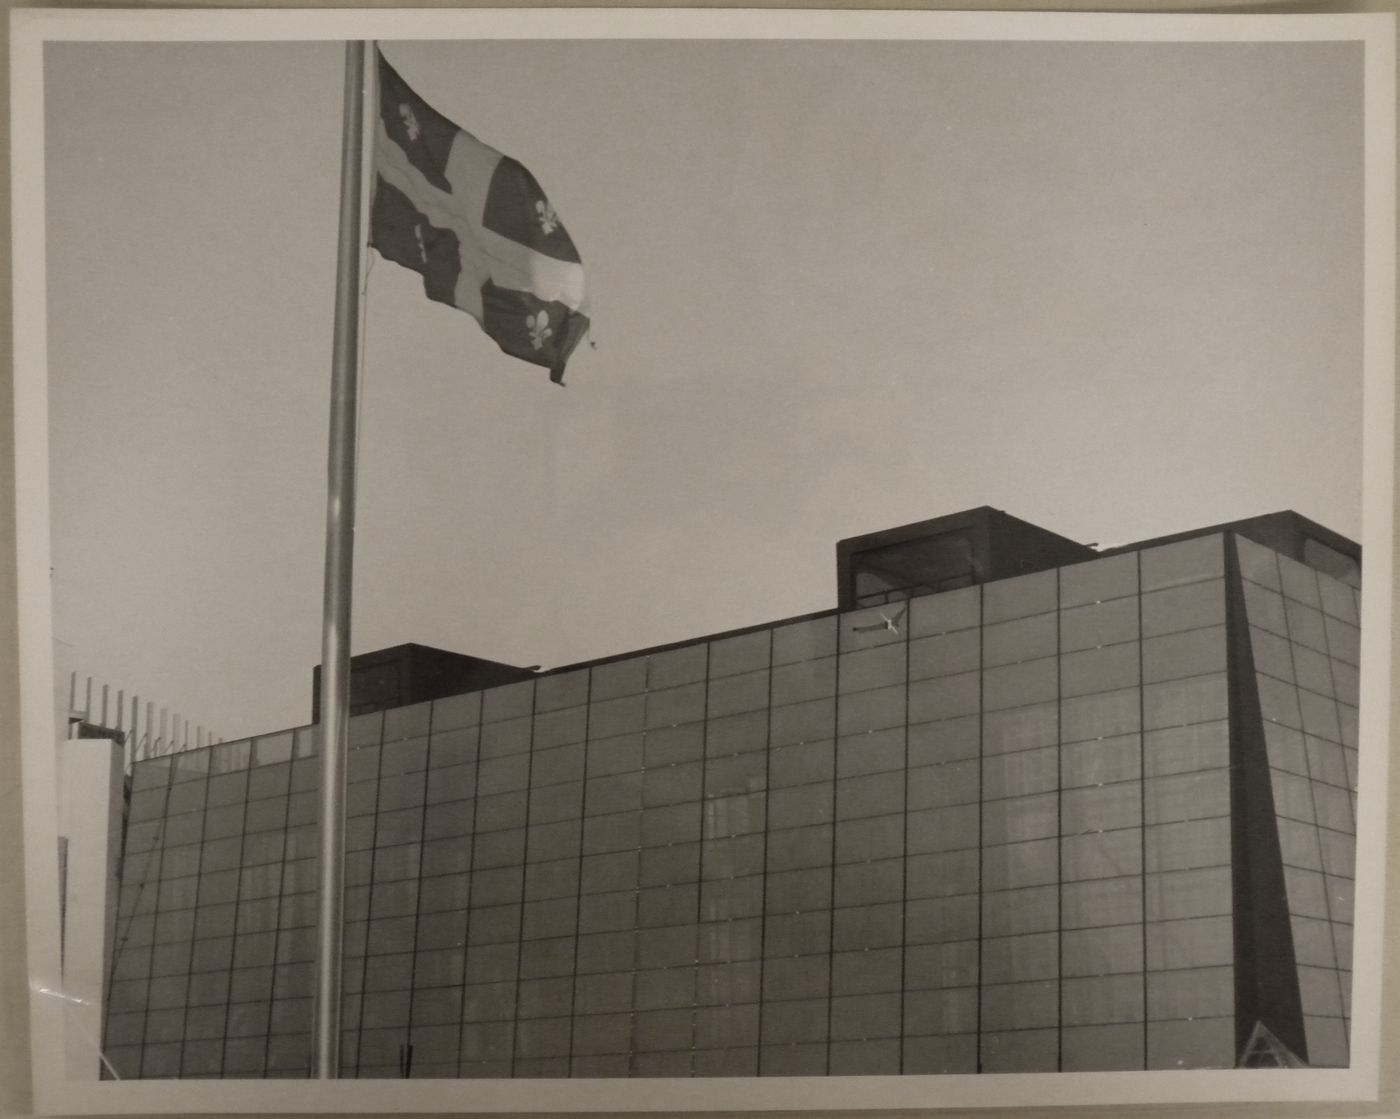 Partial view of the Province of Quebec Pavilion and of a mast with the Quebec flag, Expo 67, Montréal, Québec